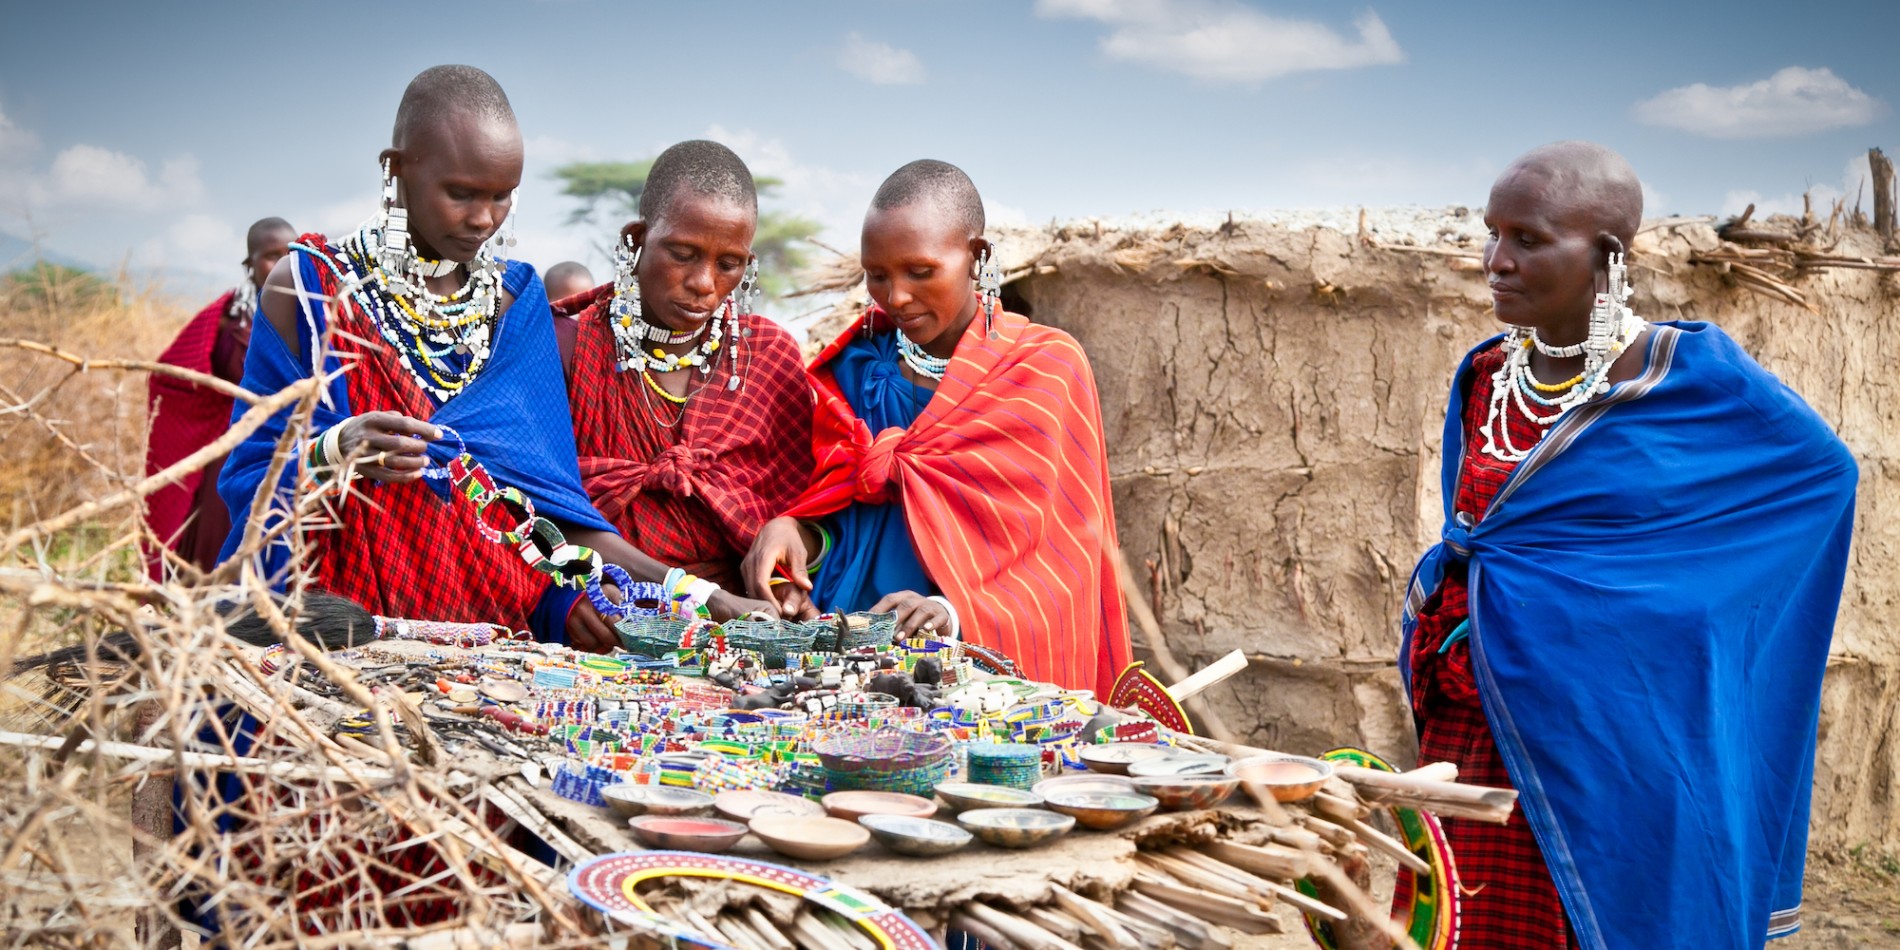 Four people of the Masai tribe in Tanzania gather around traditional art and ornaments in a village in Tanzania